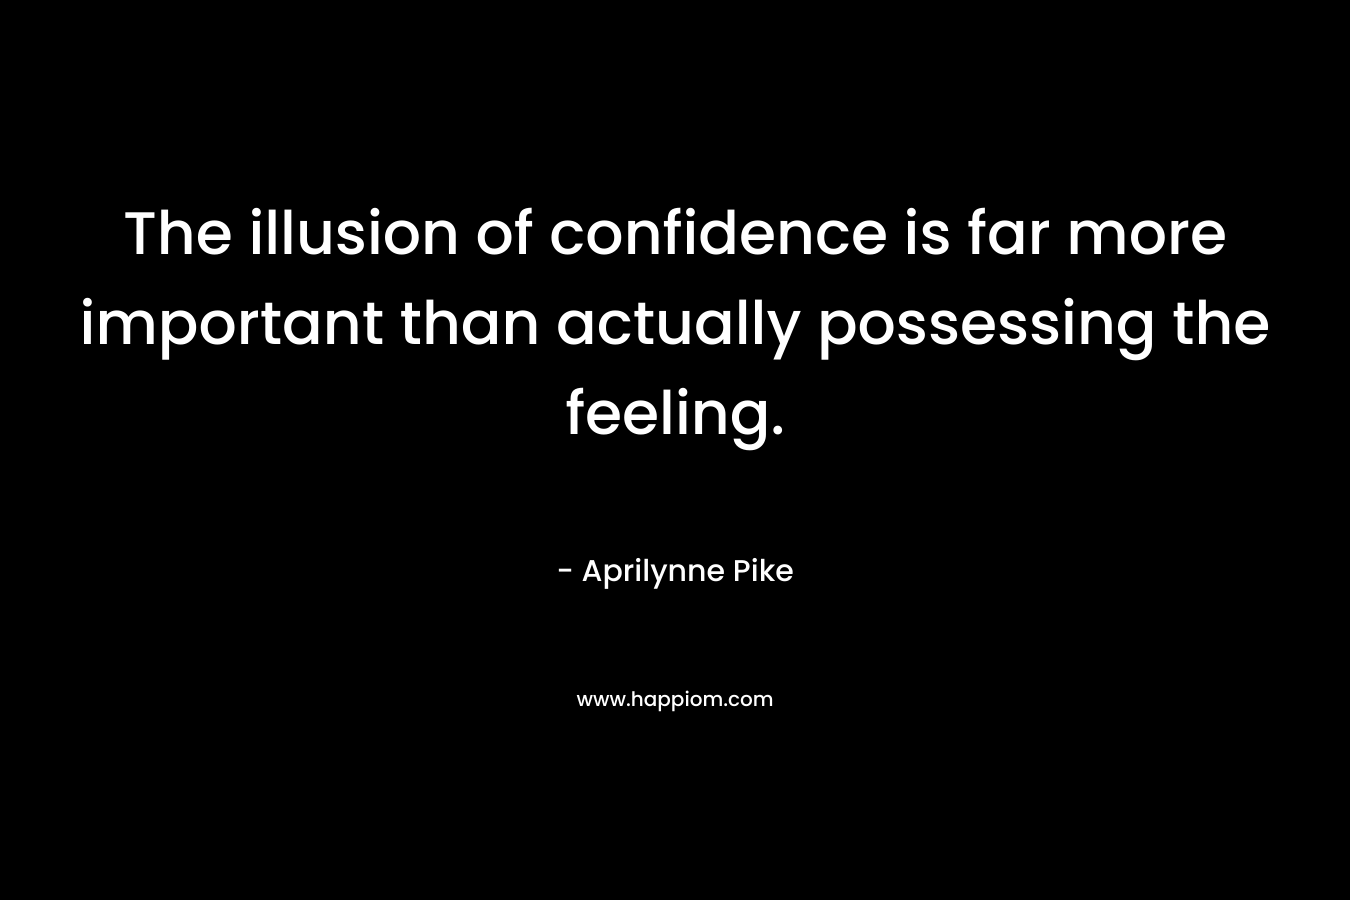 The illusion of confidence is far more important than actually possessing the feeling. – Aprilynne Pike